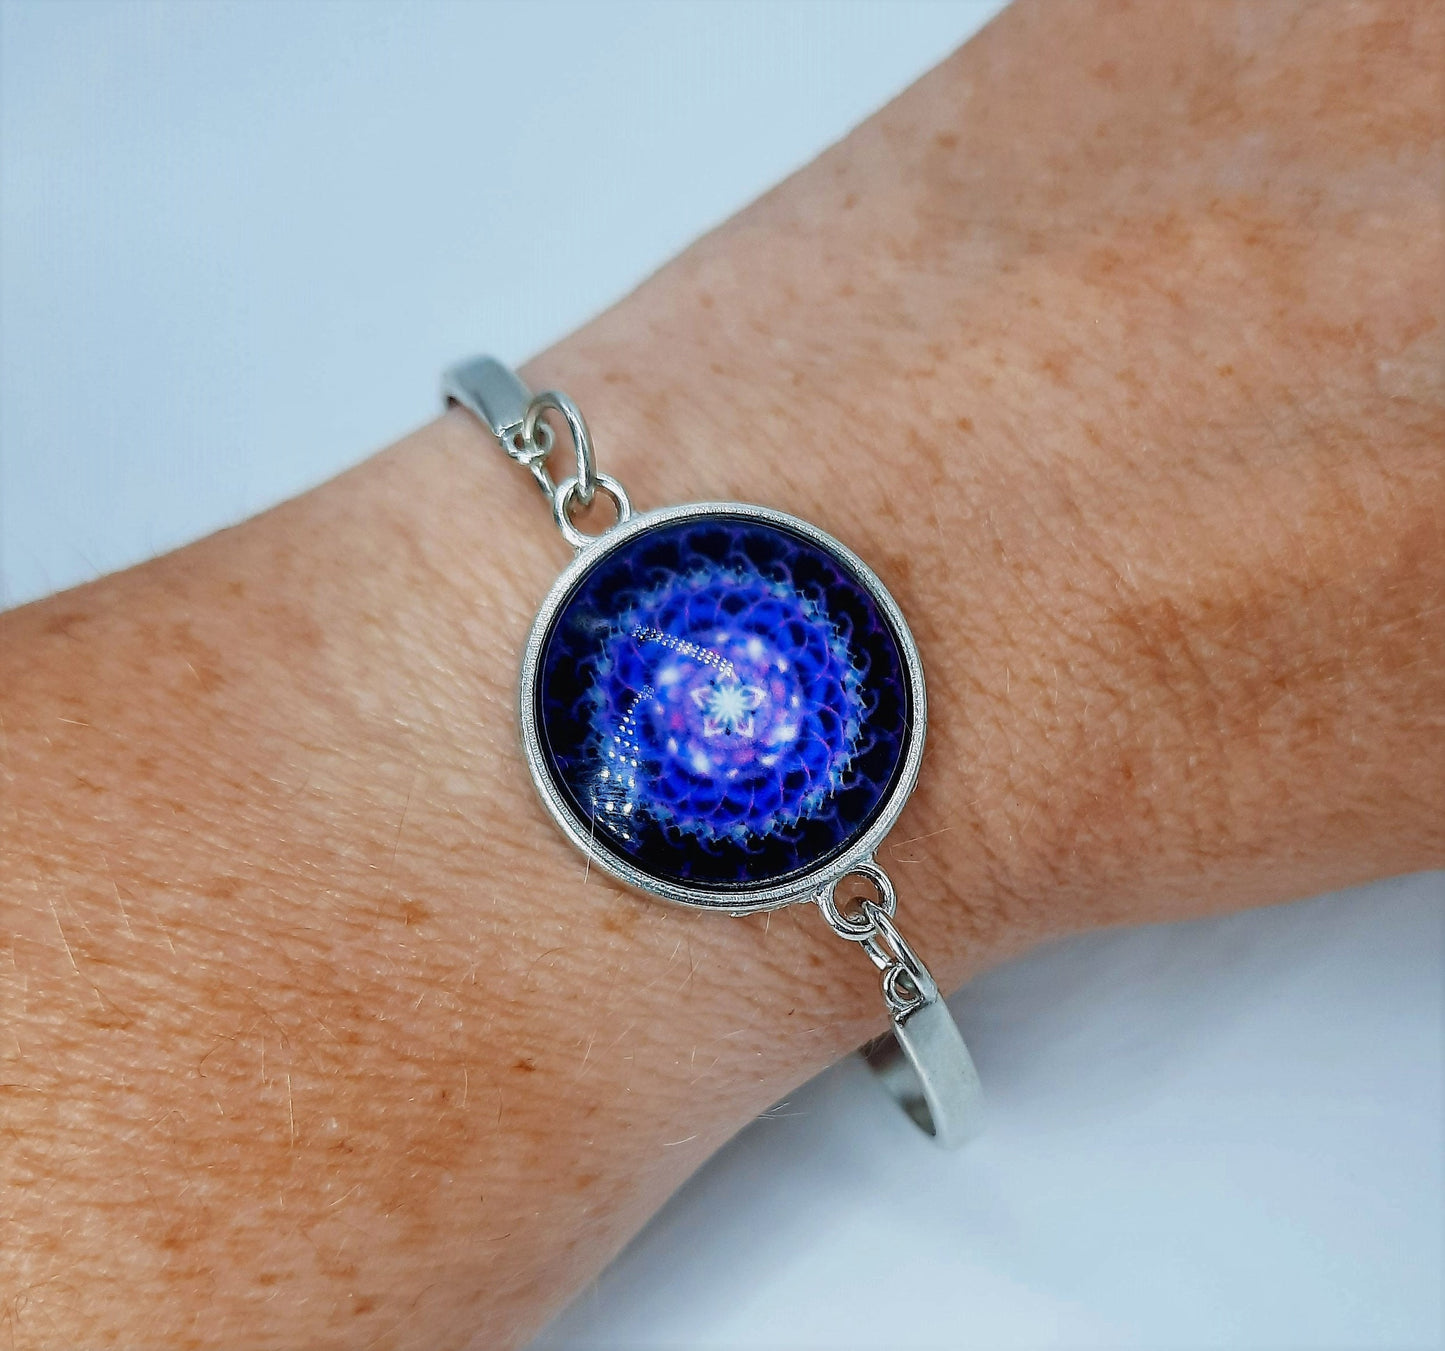 Purple Mandala Pattern Design - Glass Cabochon Stainless Steel Adjustable Bangle Bracelet - Made with Hypoallergenic Stainless Steel